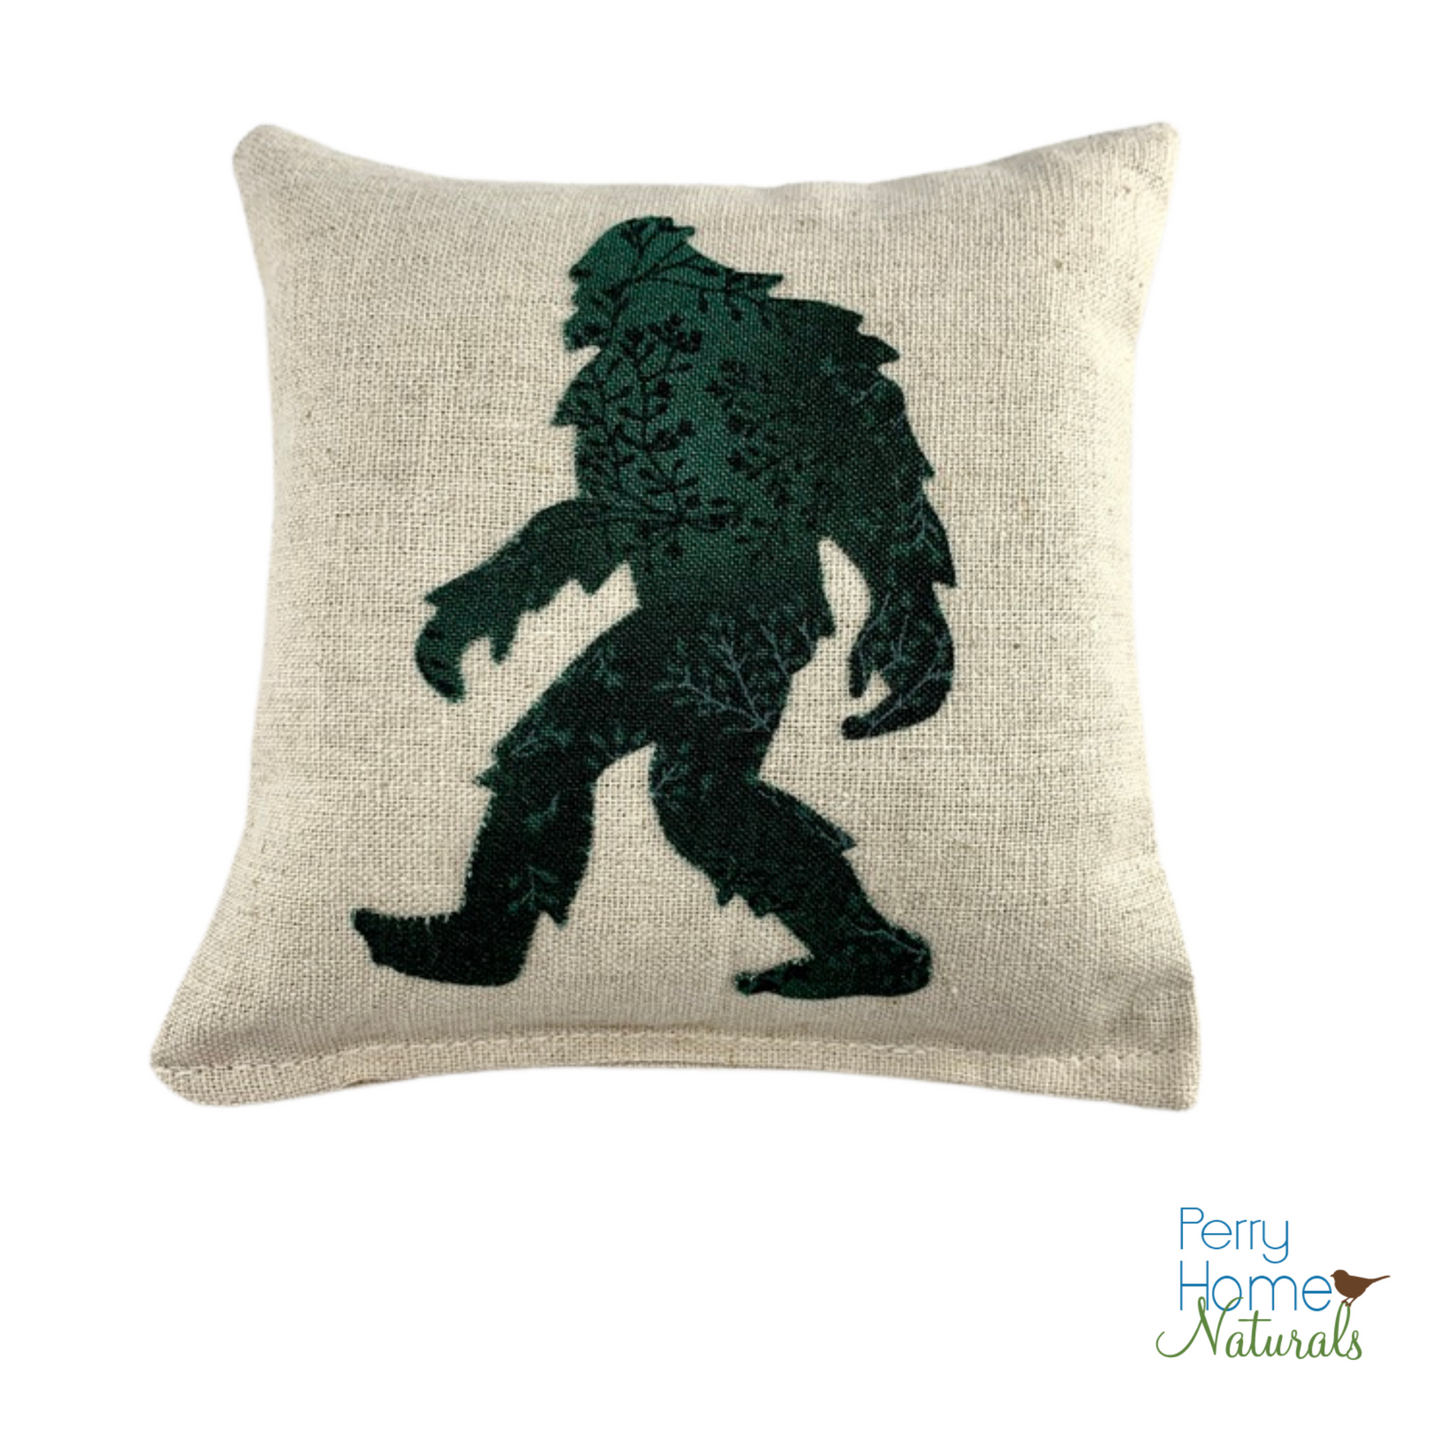 Sasquatch Sachet (Size M only) - Choice of Applique Color and Scent